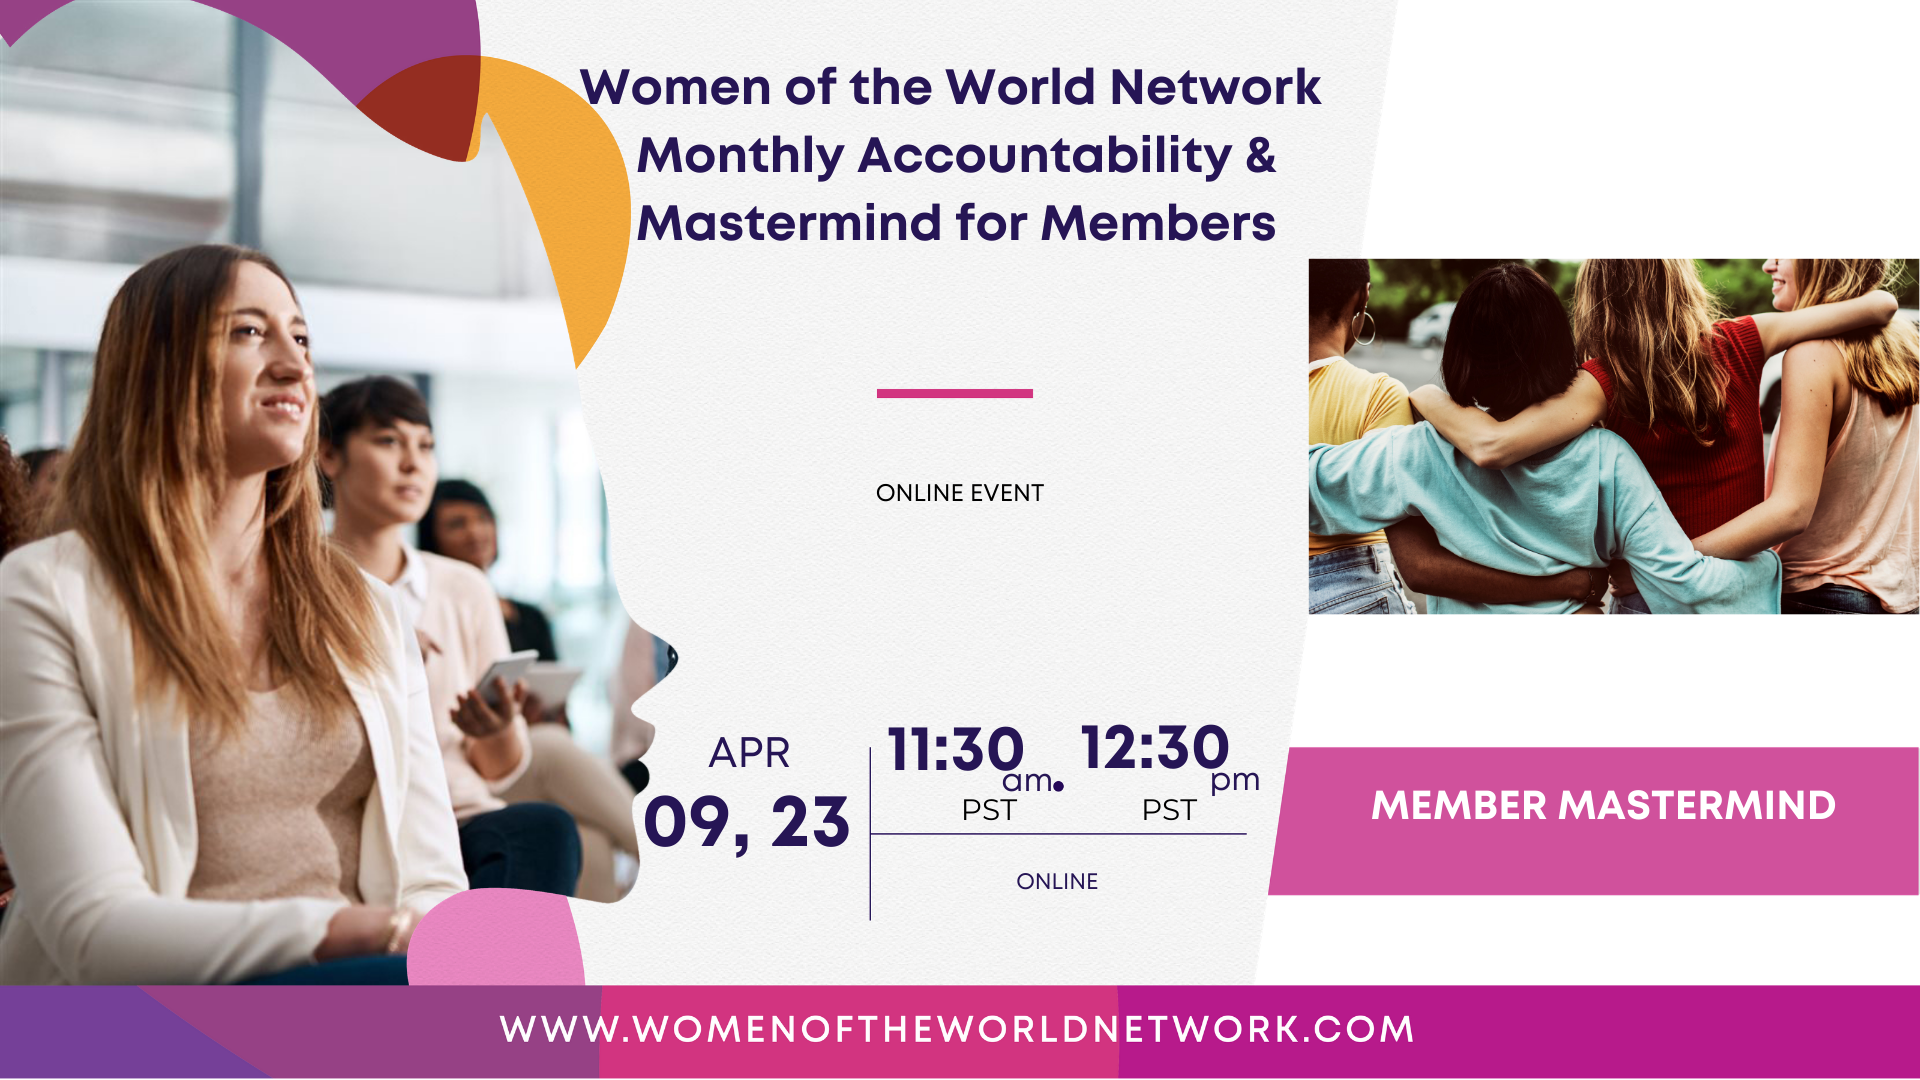 Women of the World Network: Member Mastermind